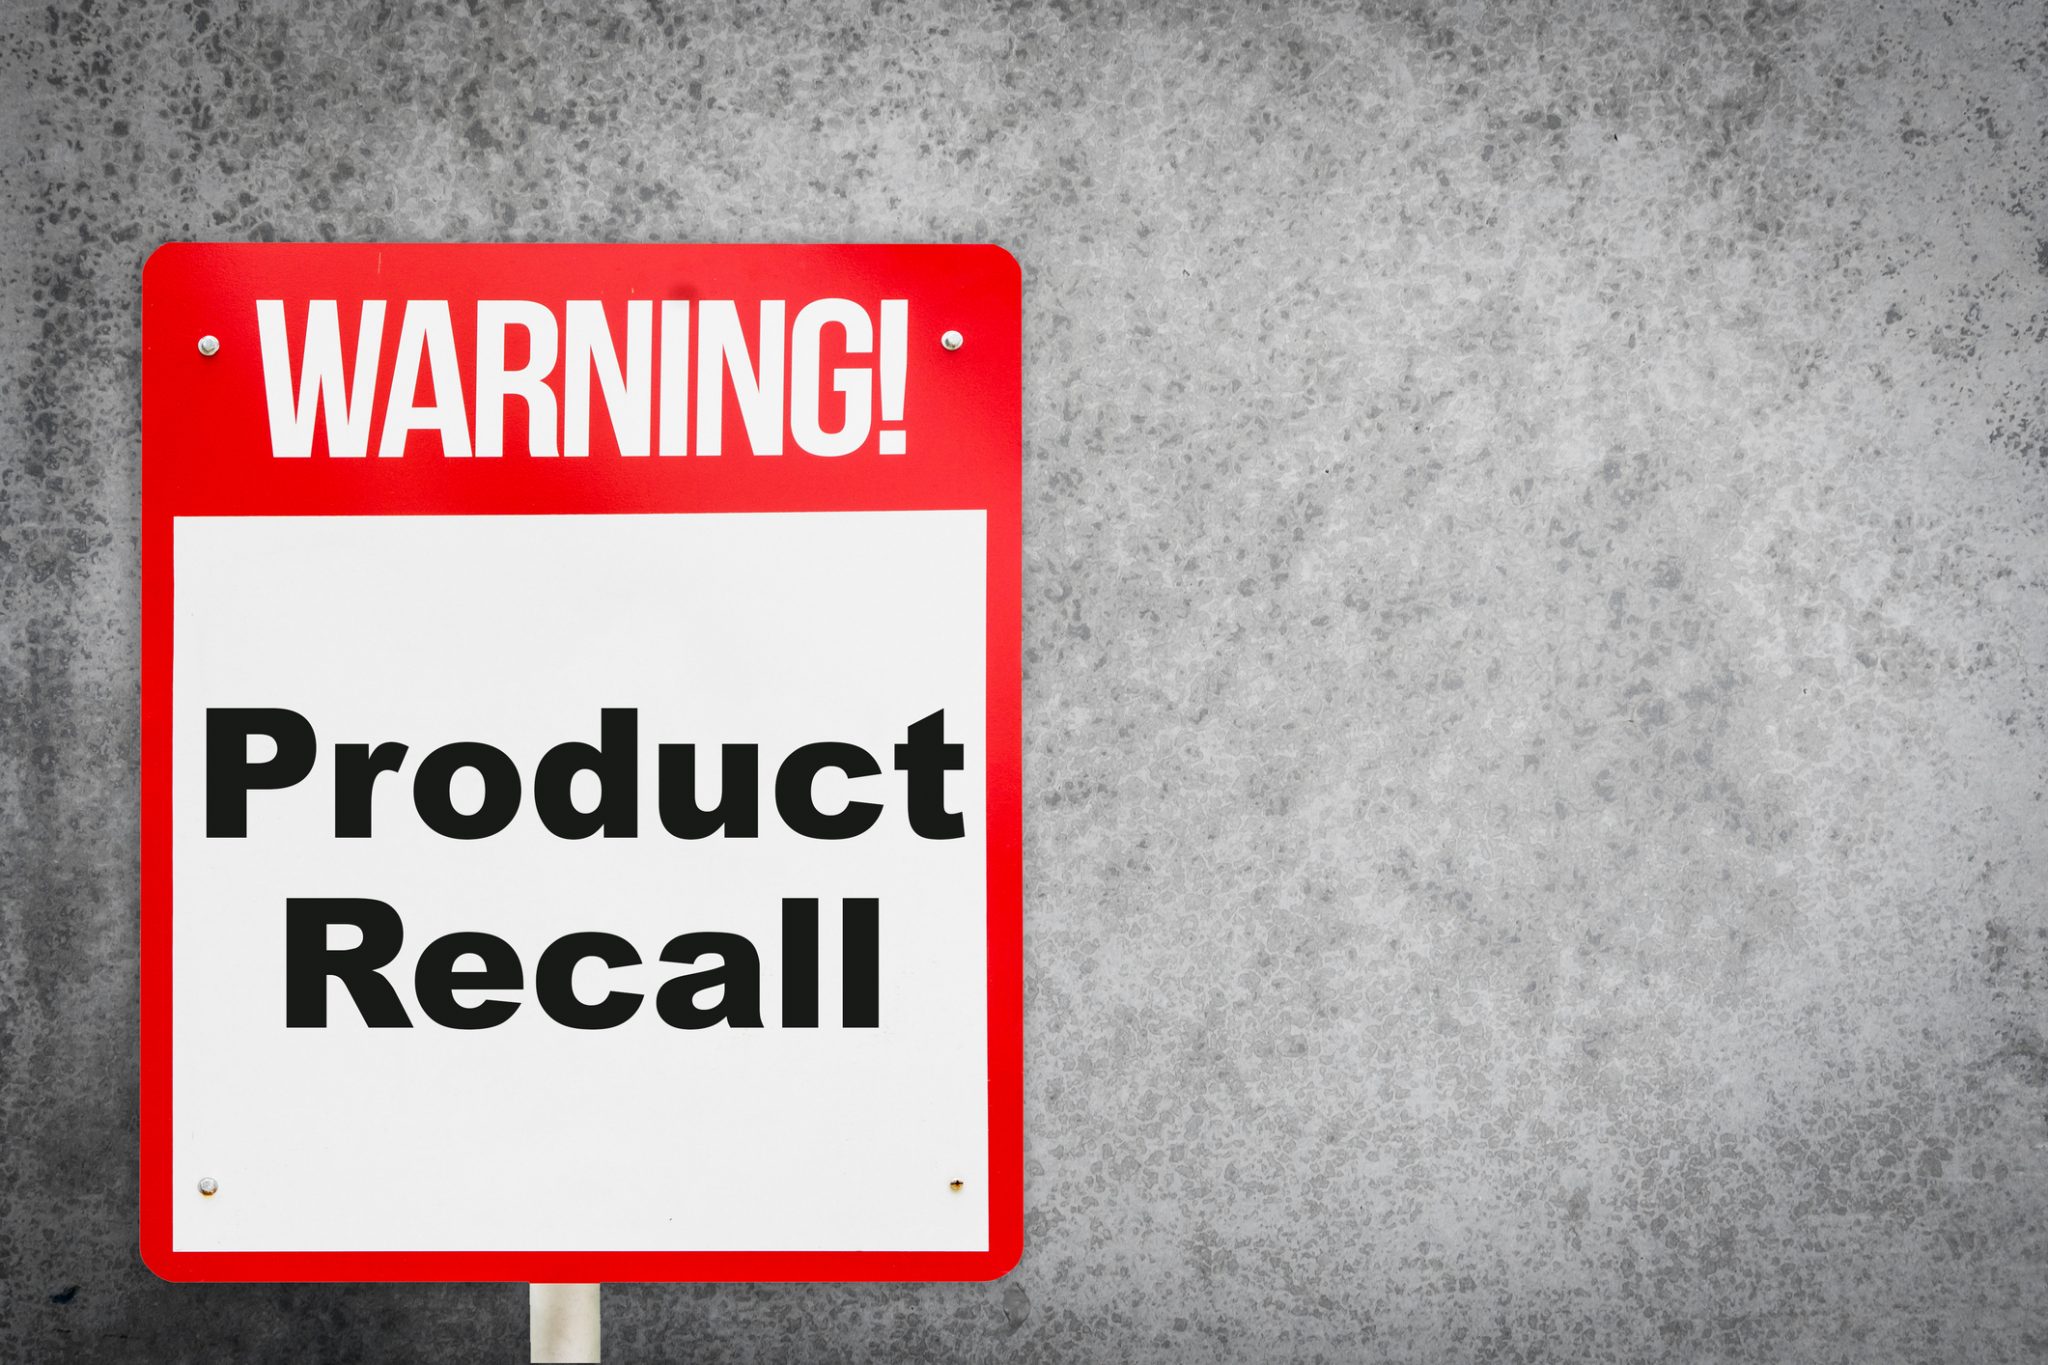 Product Recall problem warning signage for production industry